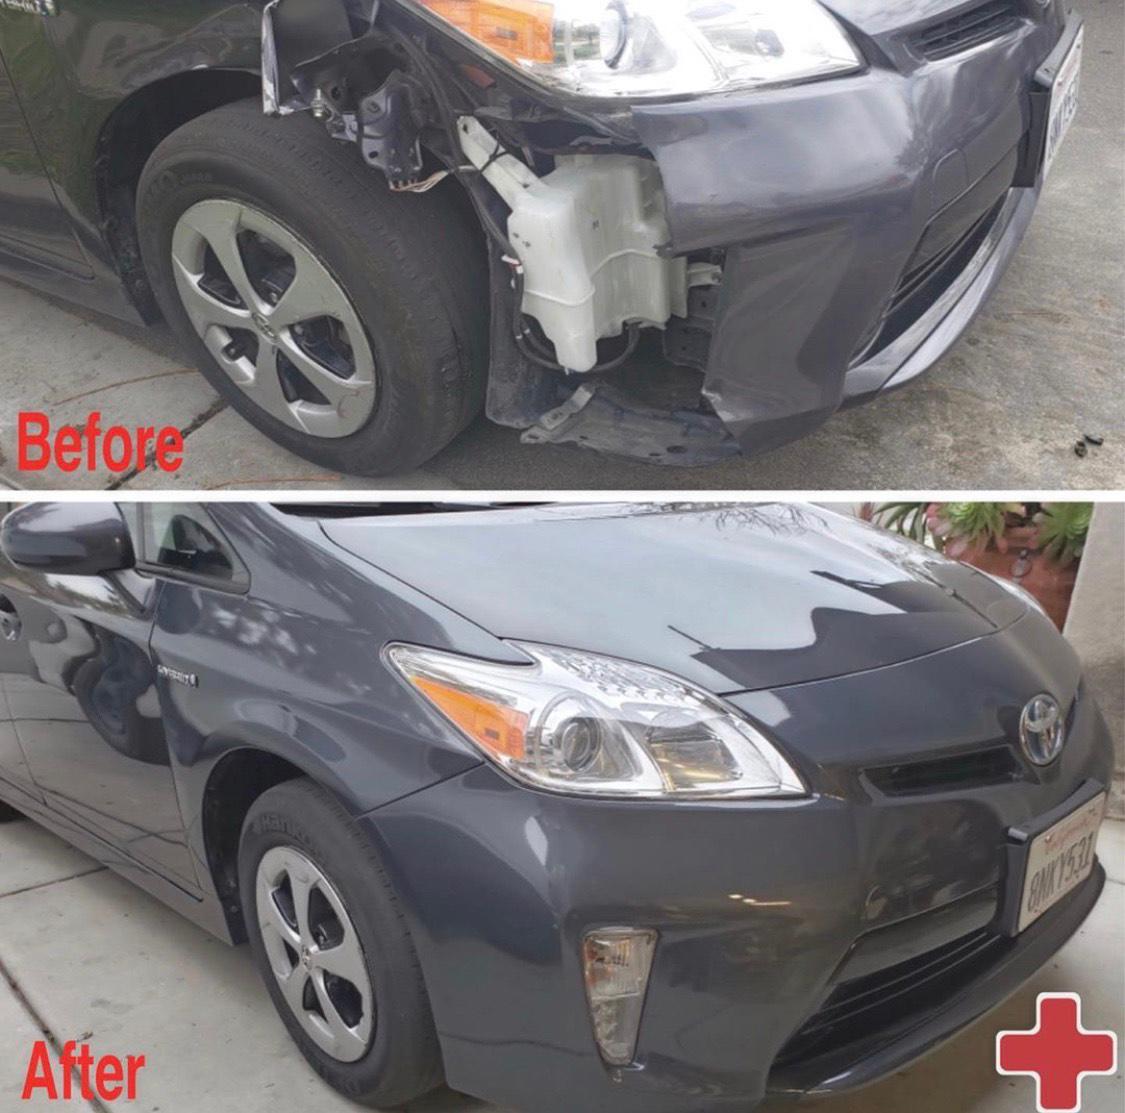 At Carbulance Mobile Auto Body, we specialize in comprehensive auto body repair services in San Diego. Our skilled technicians are experts in restoring your vehicle to its pre-accident condition, addressing damage from minor fender benders to major collisions.